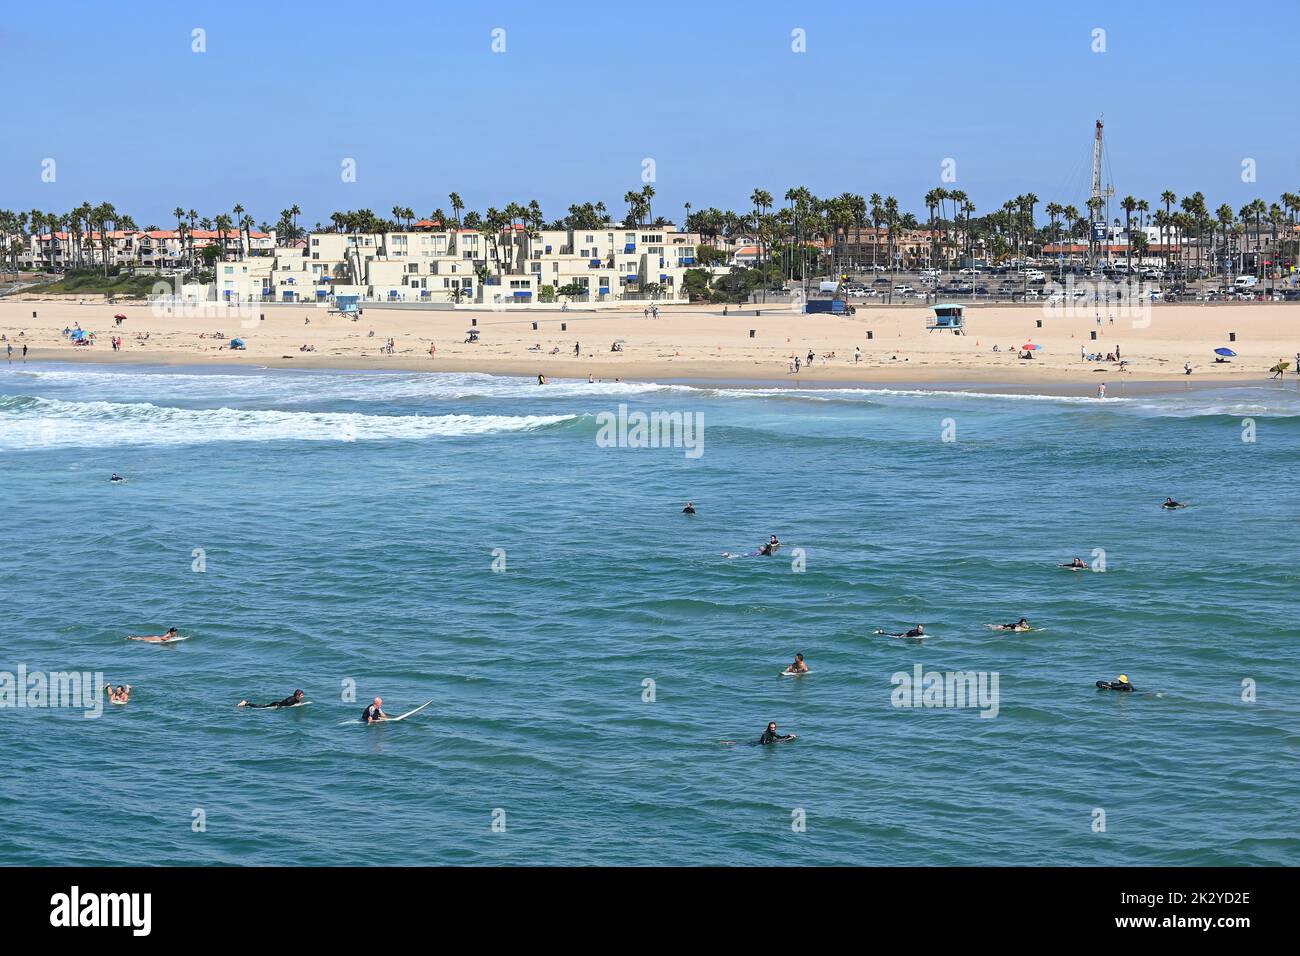 HUNTINGTON BEACH, CALIFORNIA, 19 SEPT 2022: A large group of surfers on their boards off the pier in Huntington Beach during the International Surfing Stock Photo